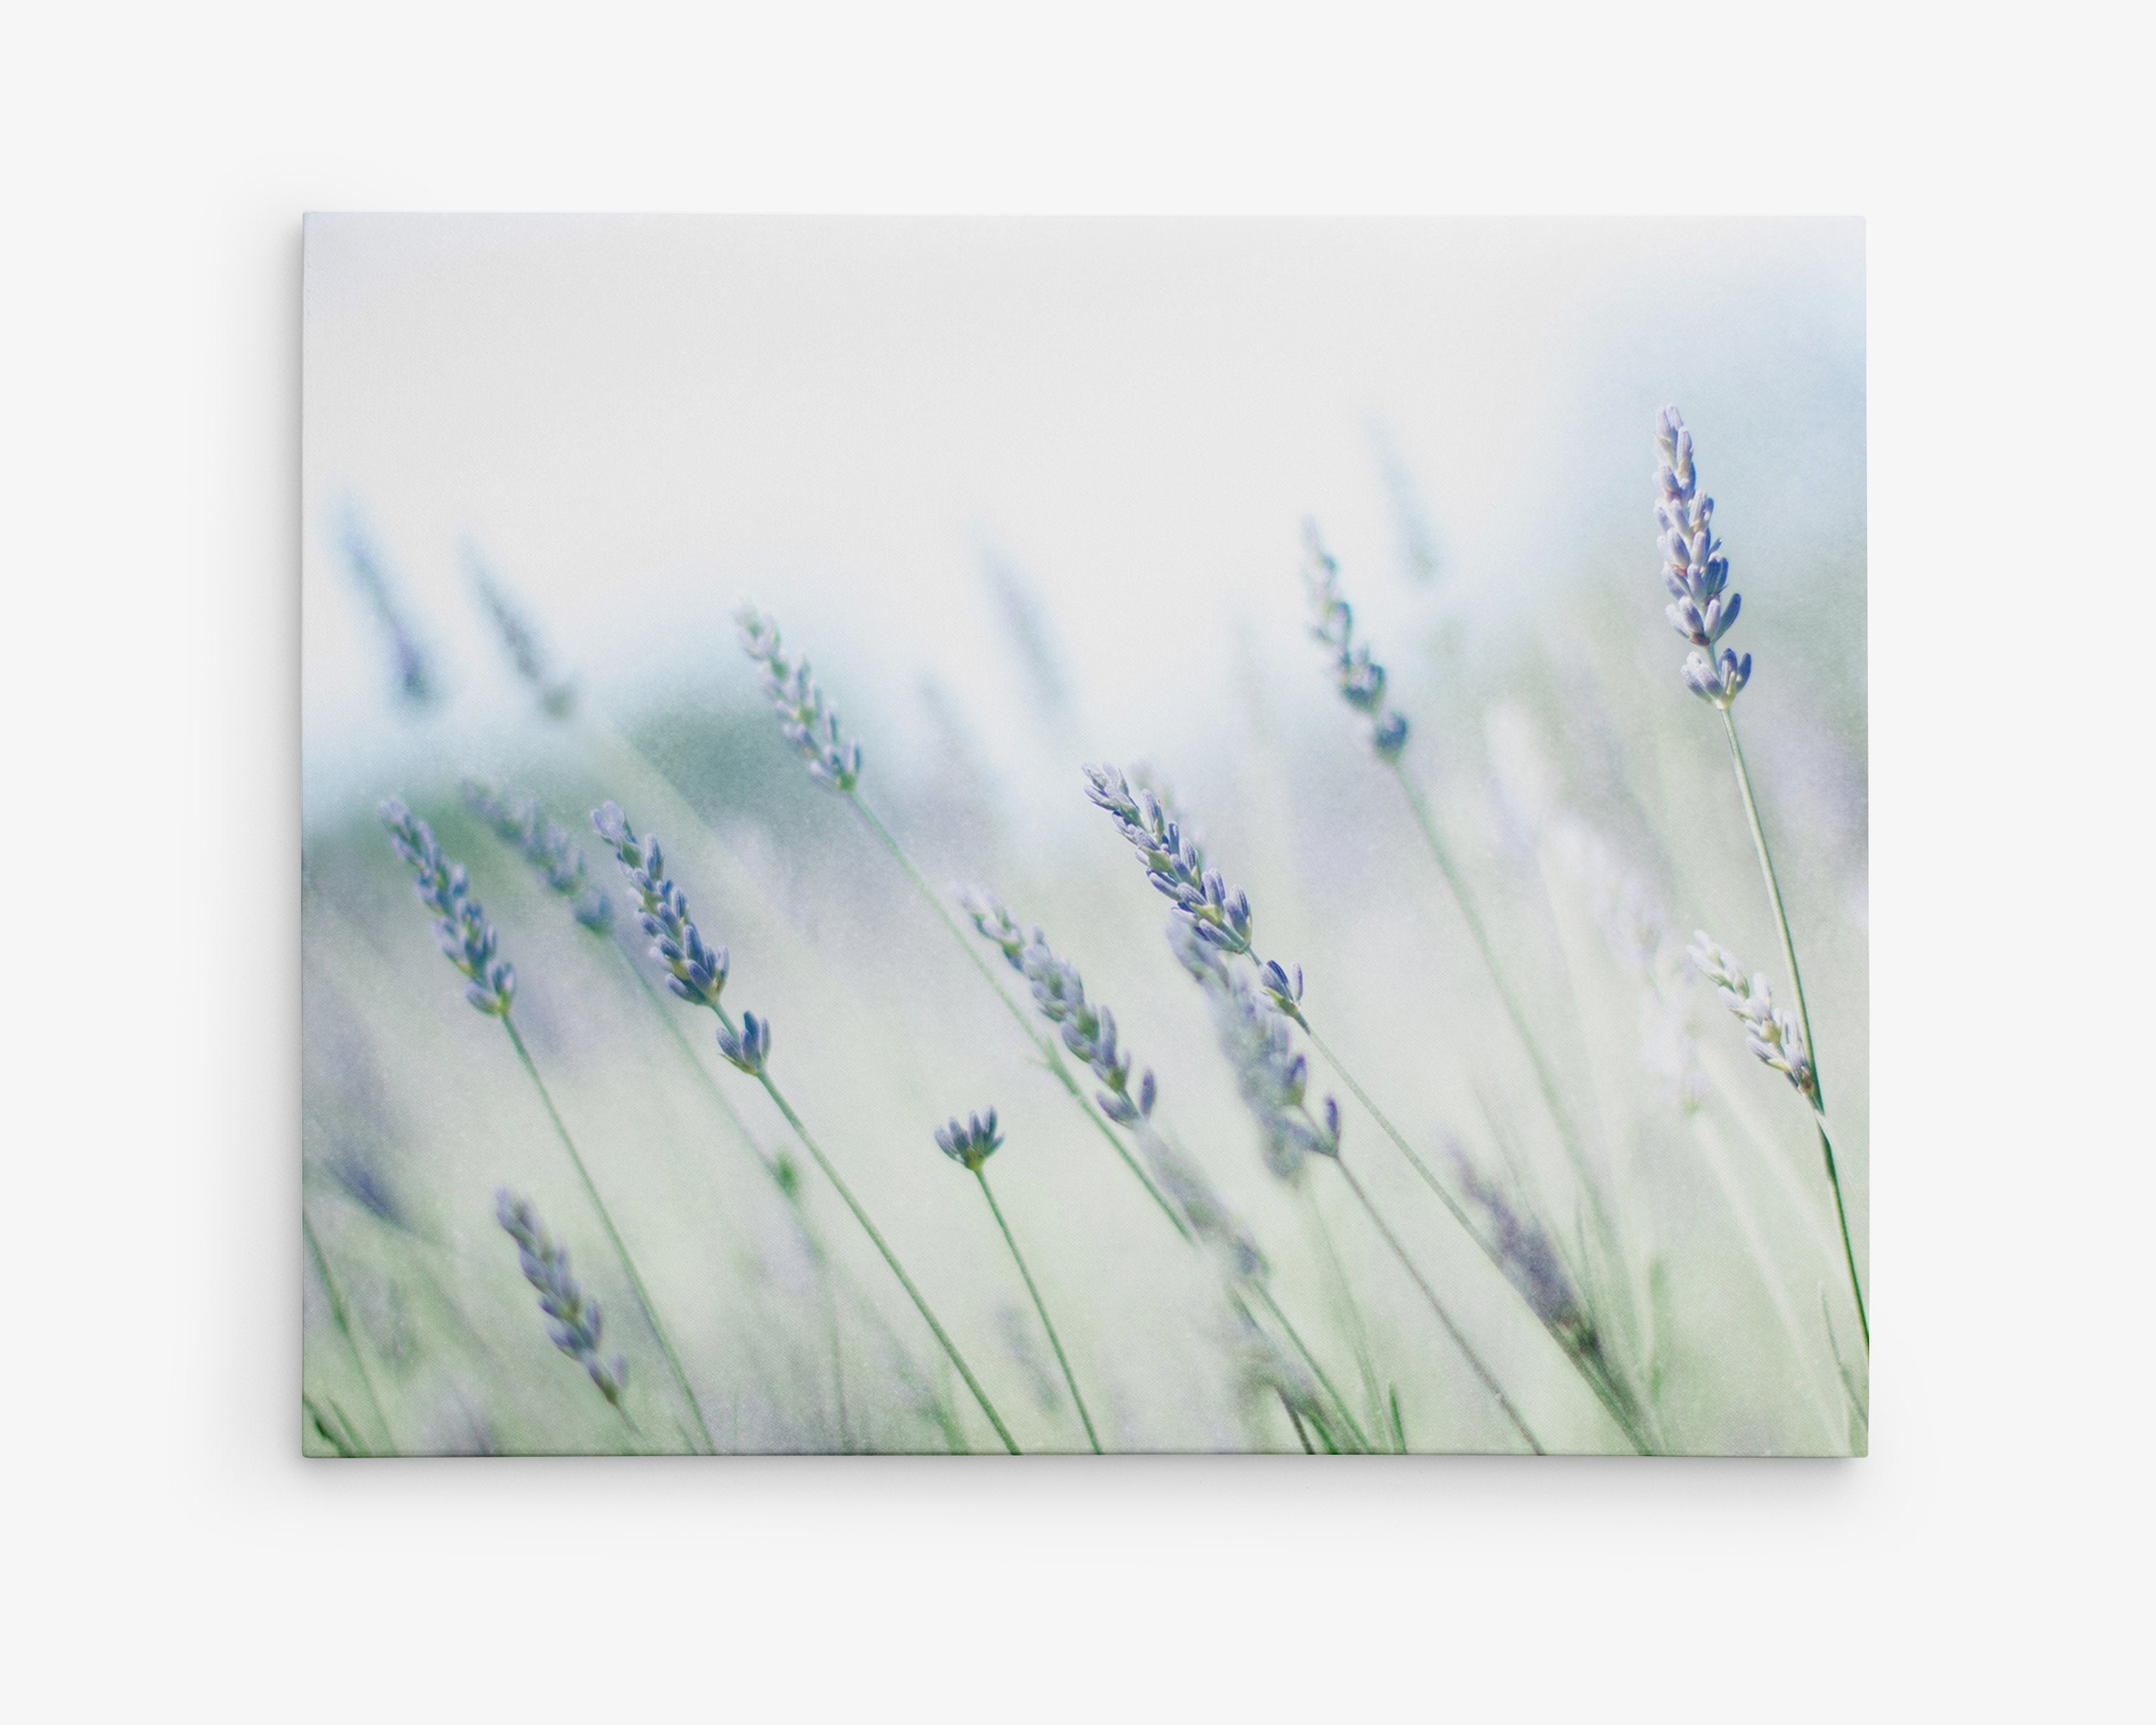 A soft-focus image of lavender flowers, capturing a serene and delicate scene in hues of blue and green, presented on a Offley Green Rustic Farmhouse Canvas Wall Art, 'Buds of Lavender' gallery wrap.